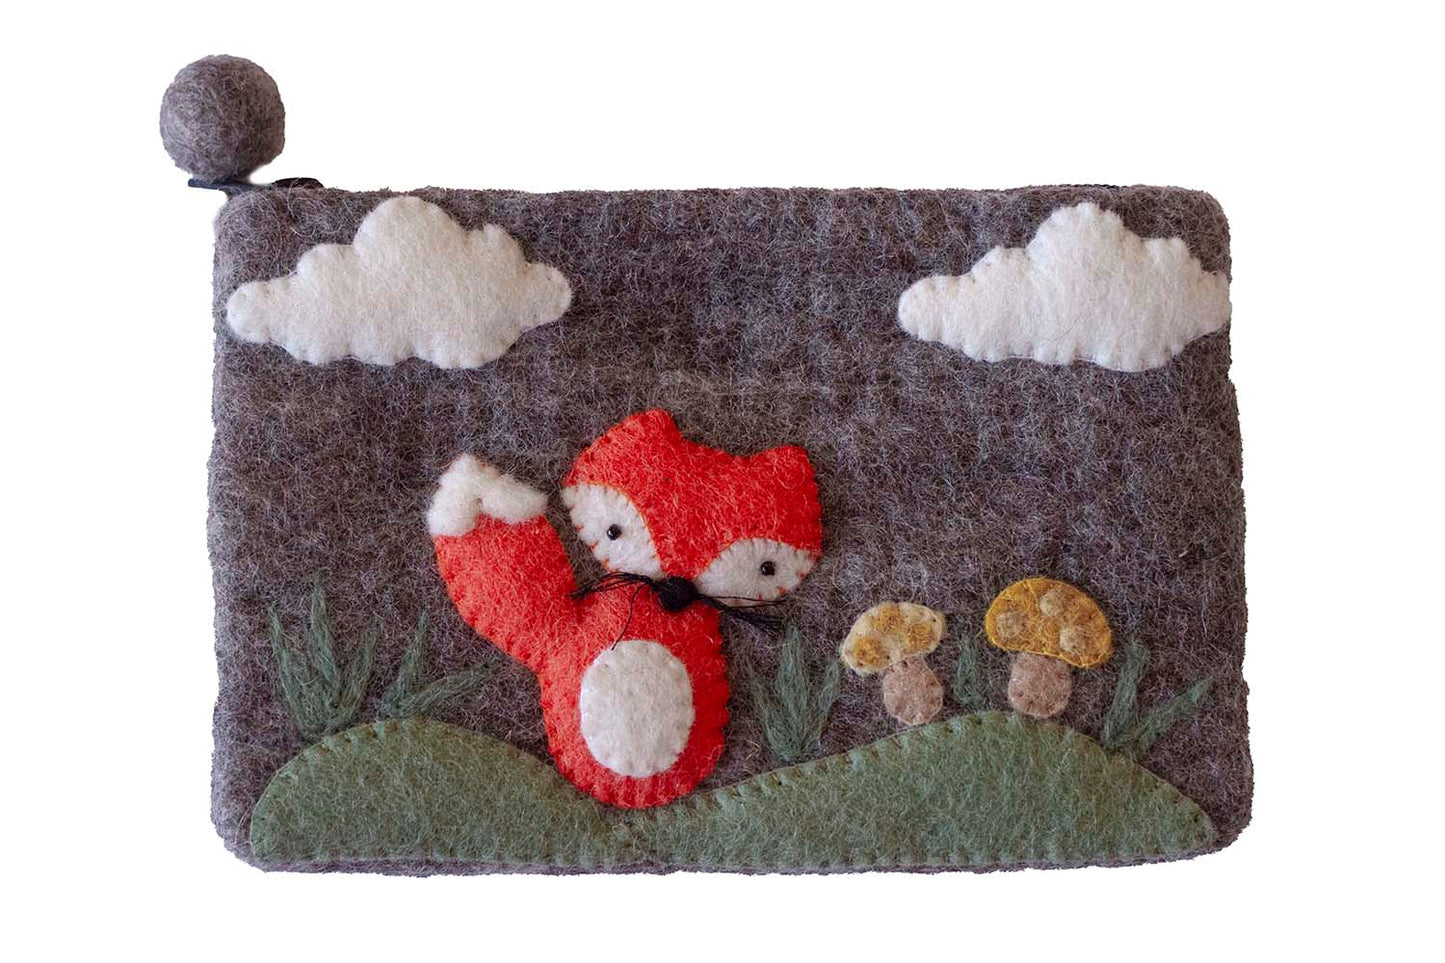 This Global Groove Life, handmade, ethical, fair trade, eco-friendly, sustainable, grey felt zipper coin pouch was created by artisans in Kathmandu Nepal and is adorned with an adorable fox and mushroom motif.